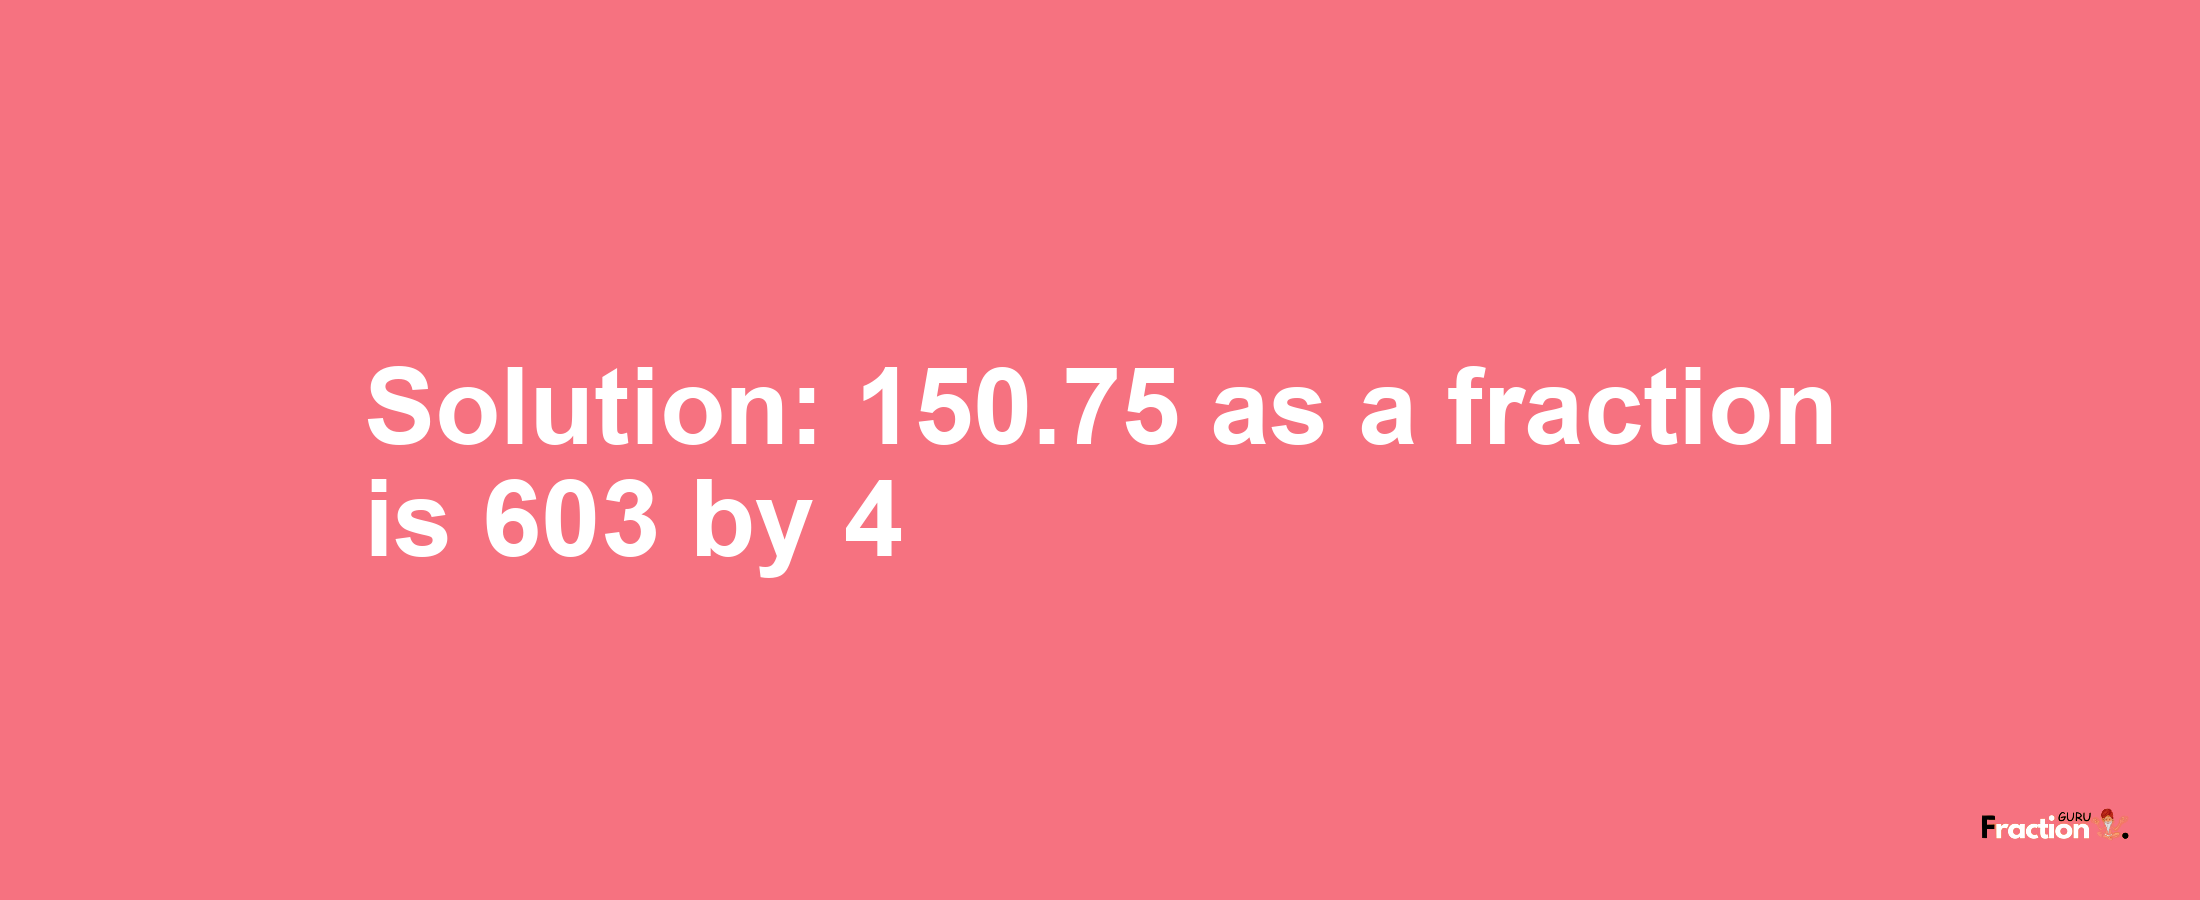 Solution:150.75 as a fraction is 603/4